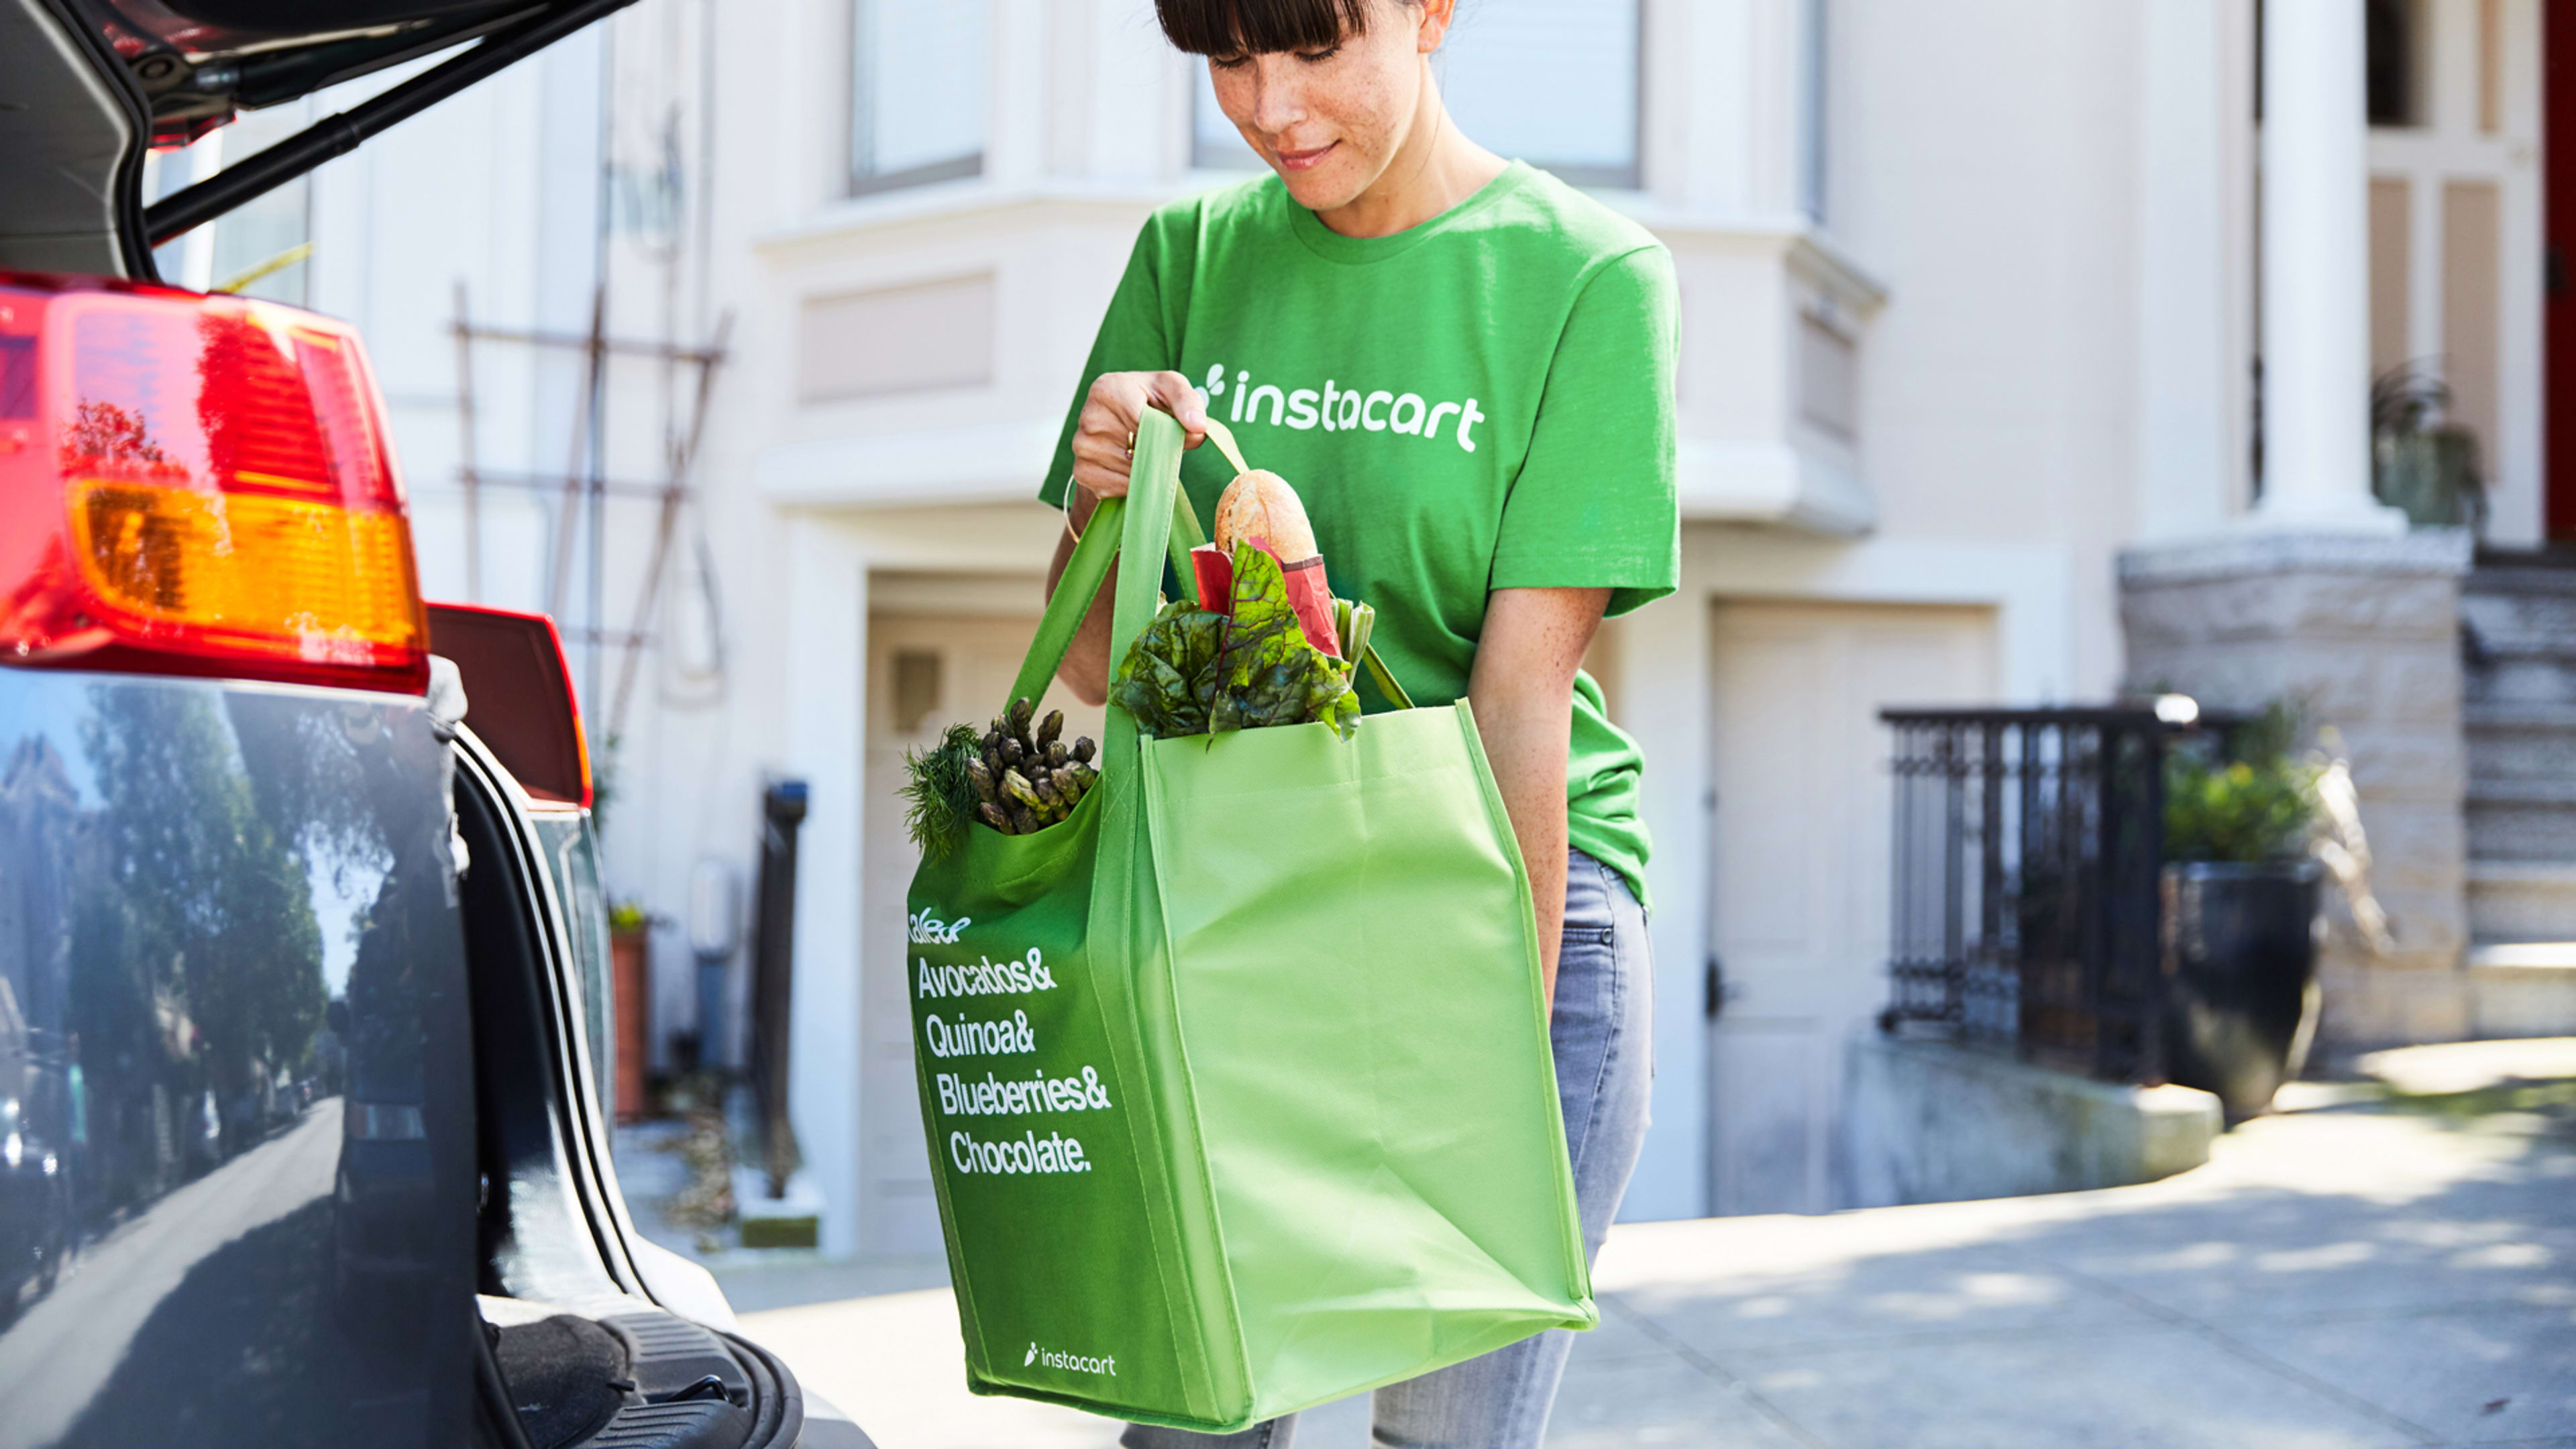 Instacart offers drivers more flexibility on when and what they deliver